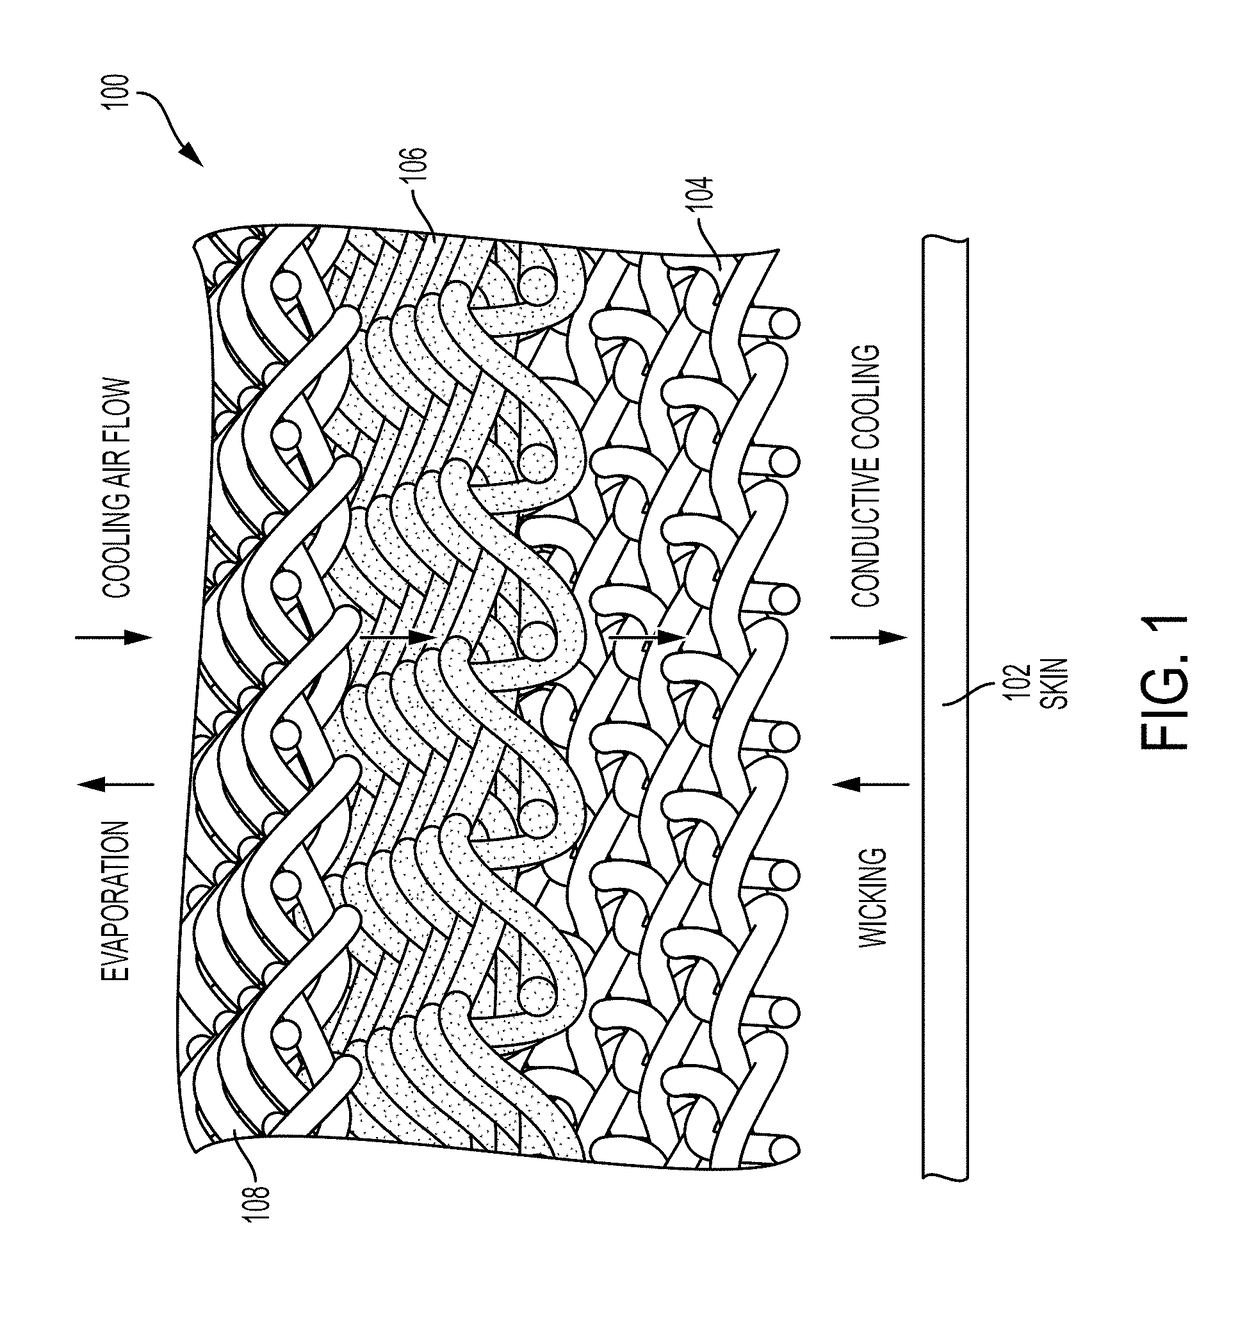 Wet-activated cooling fabric